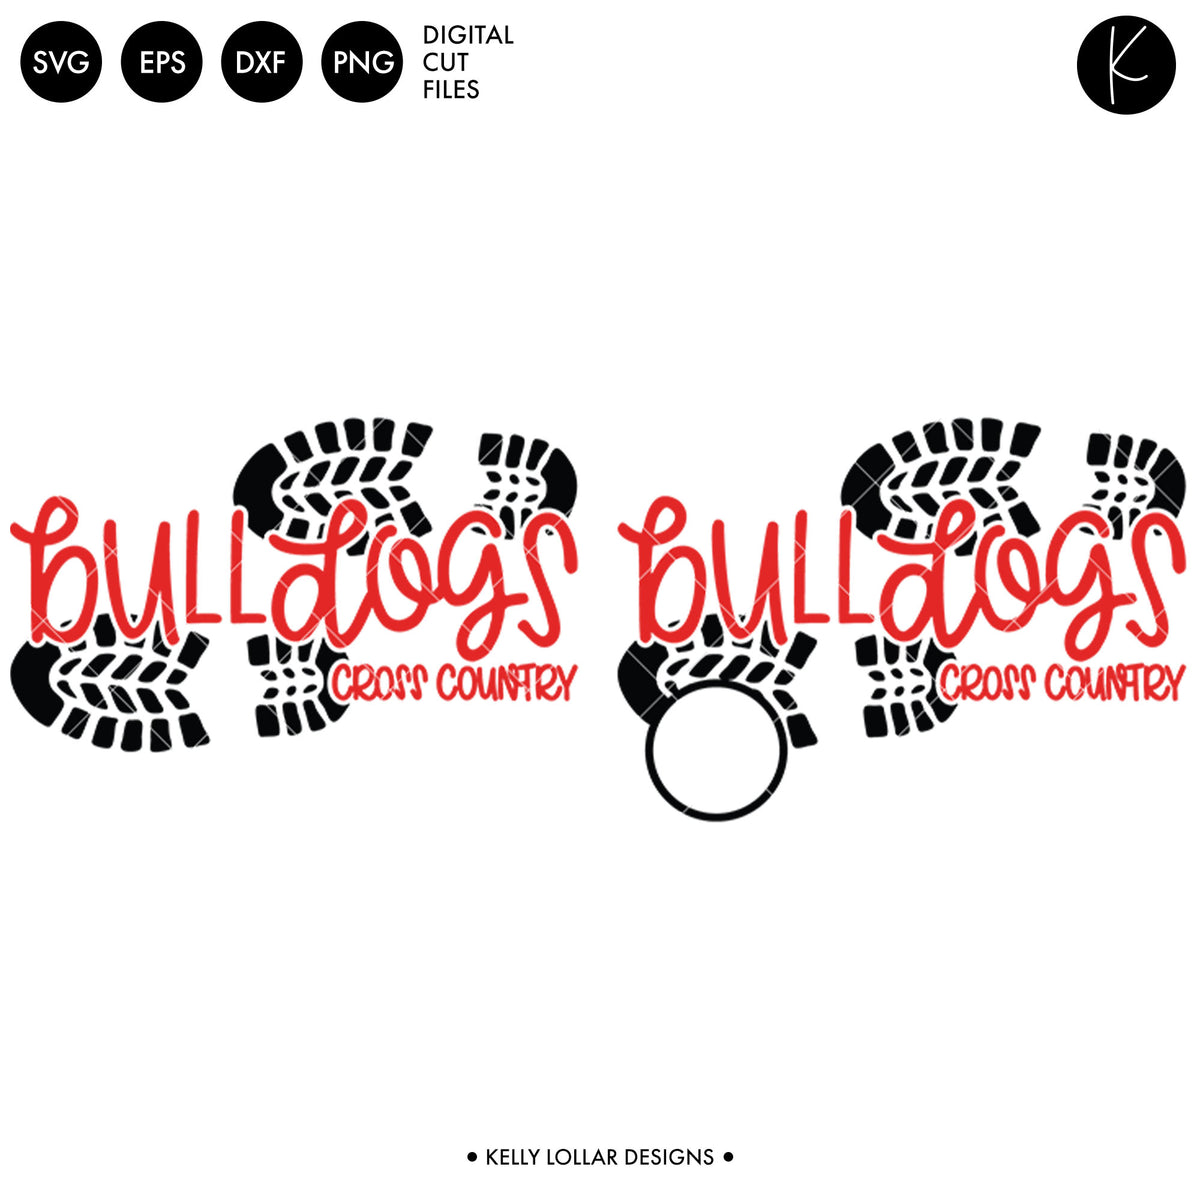 Bulldogs Cross Country Bundle | SVG DXF EPS PNG Cut Files